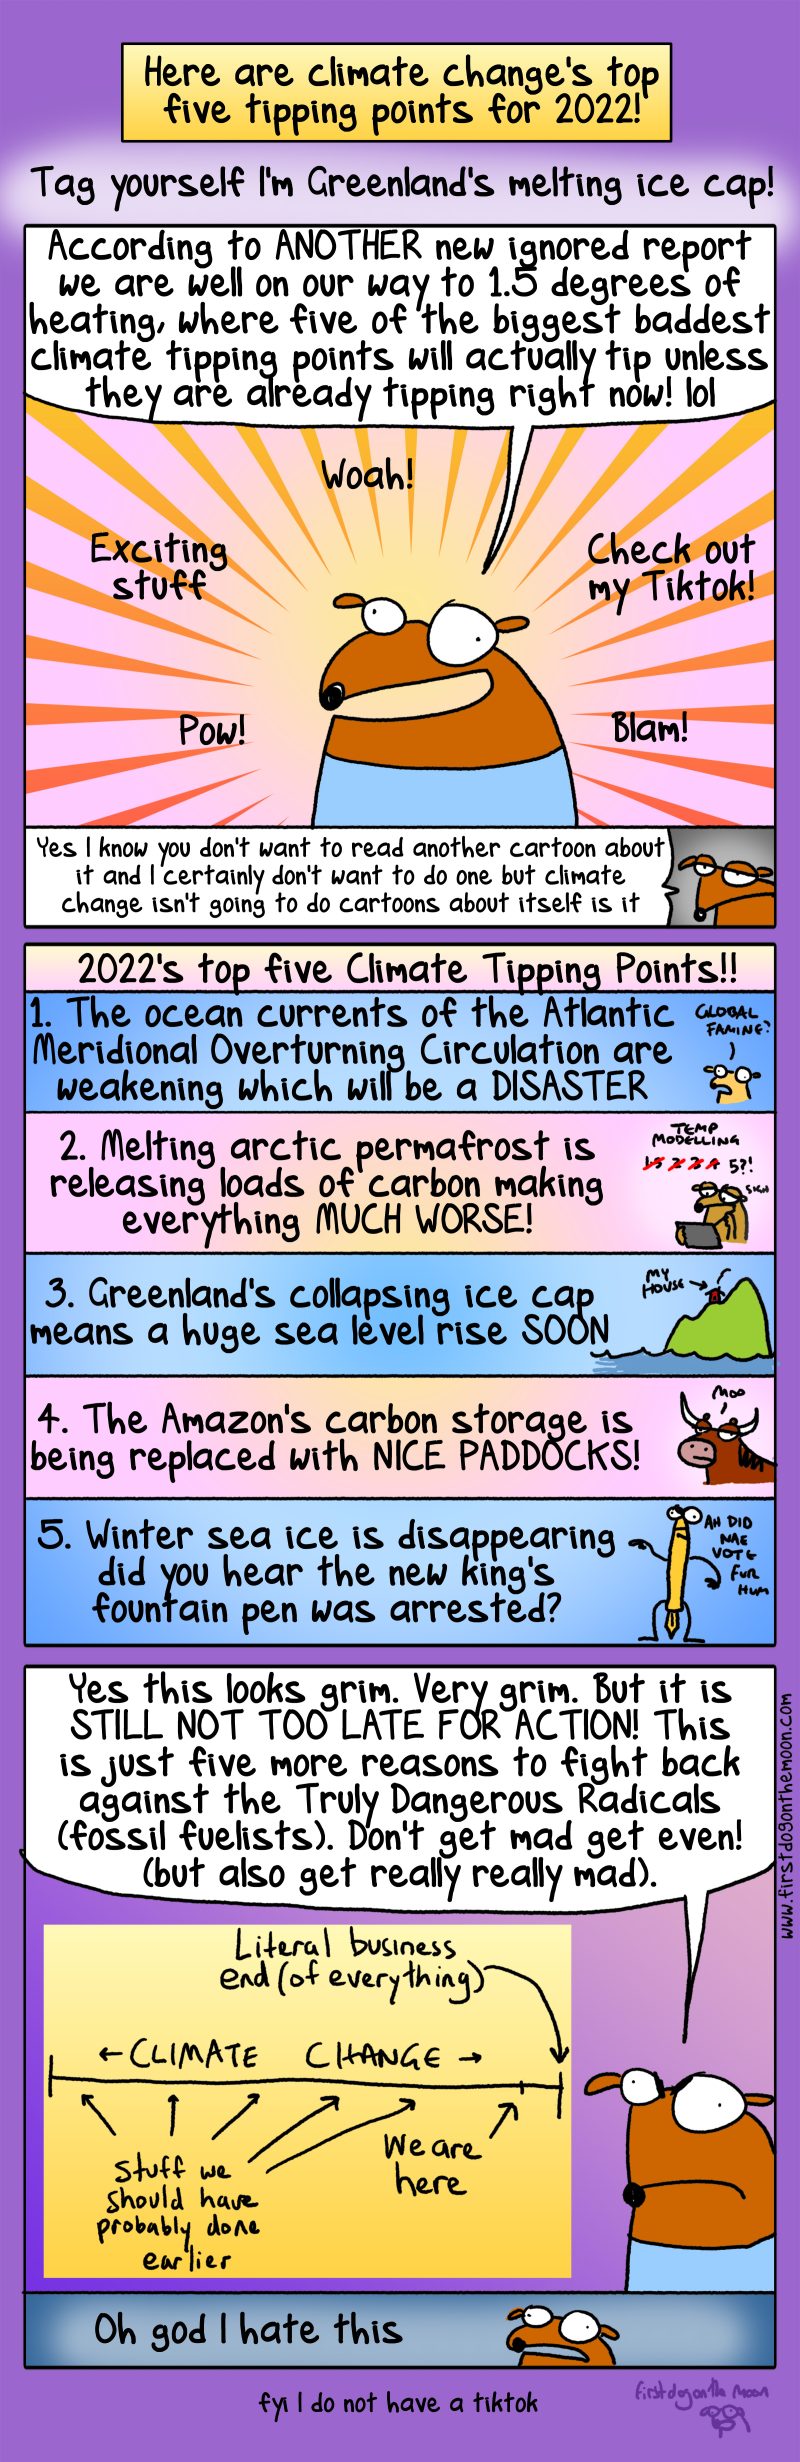 Climate change’s top five tipping points are out!